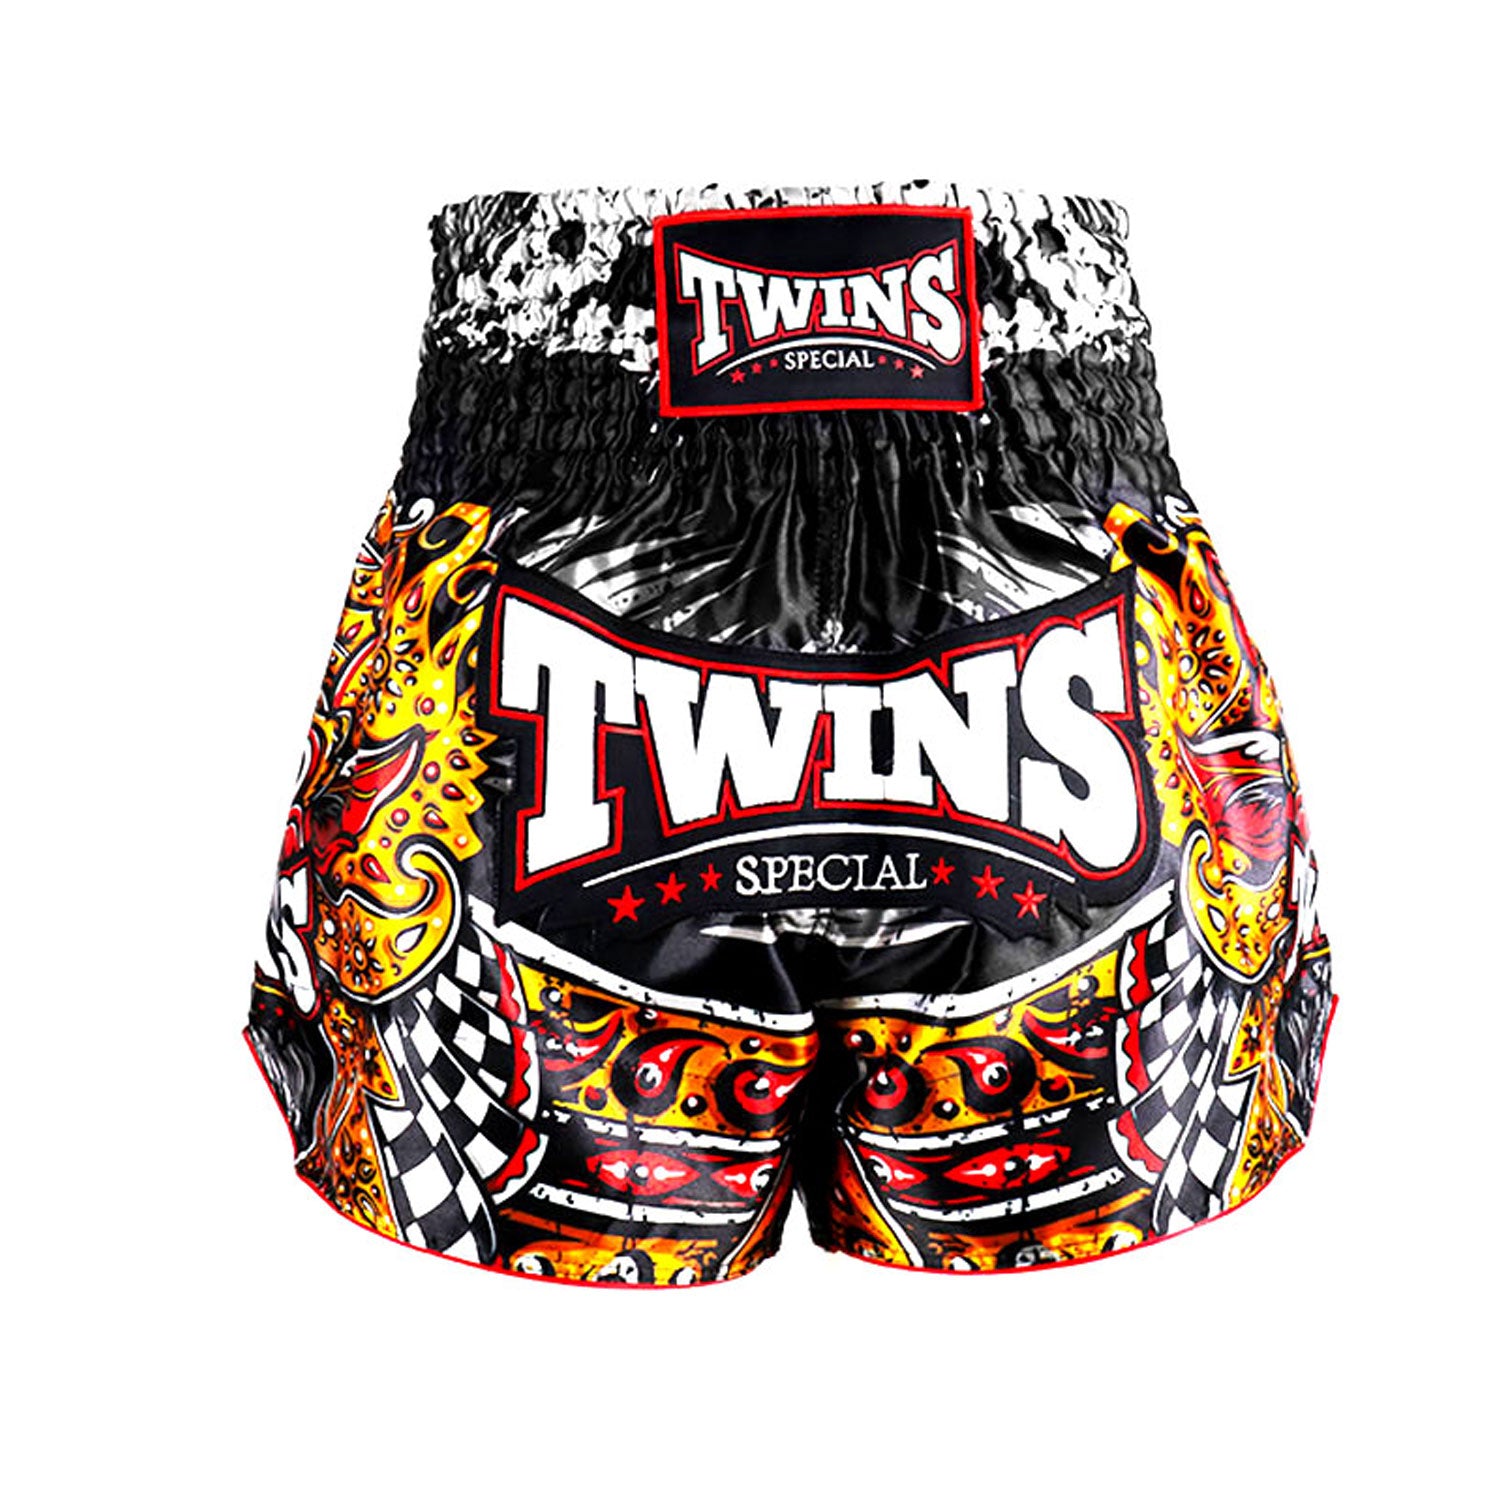 Twins Barong Muay Thai Shorts Twins Special